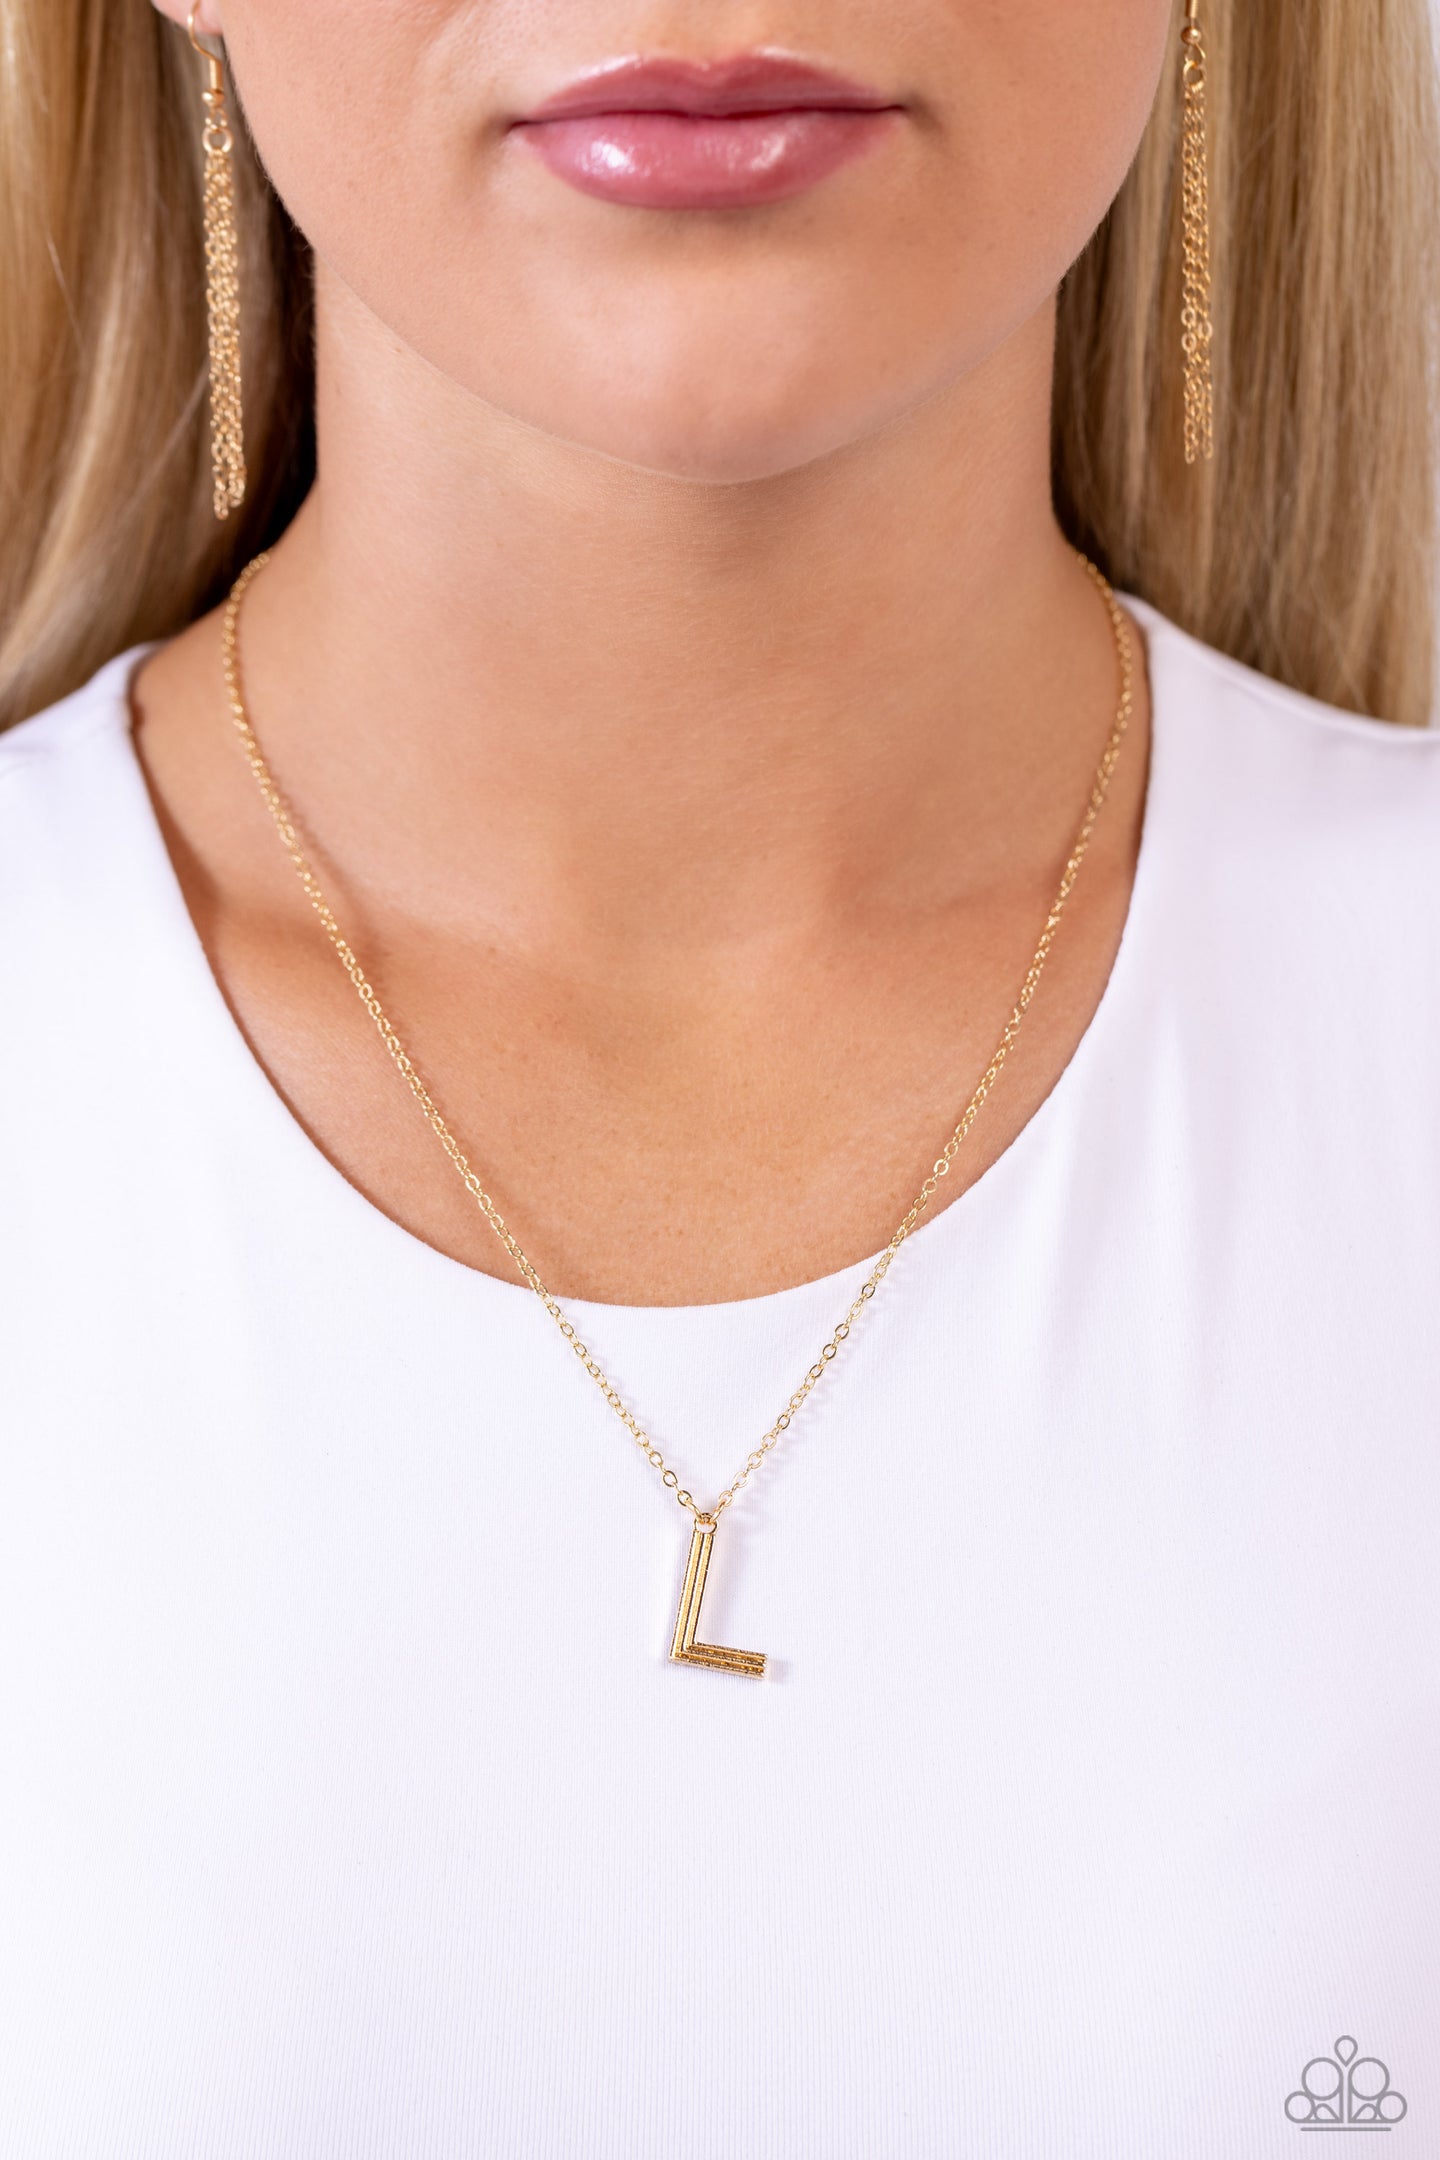 Leave Your Initials - Gold - L necklace